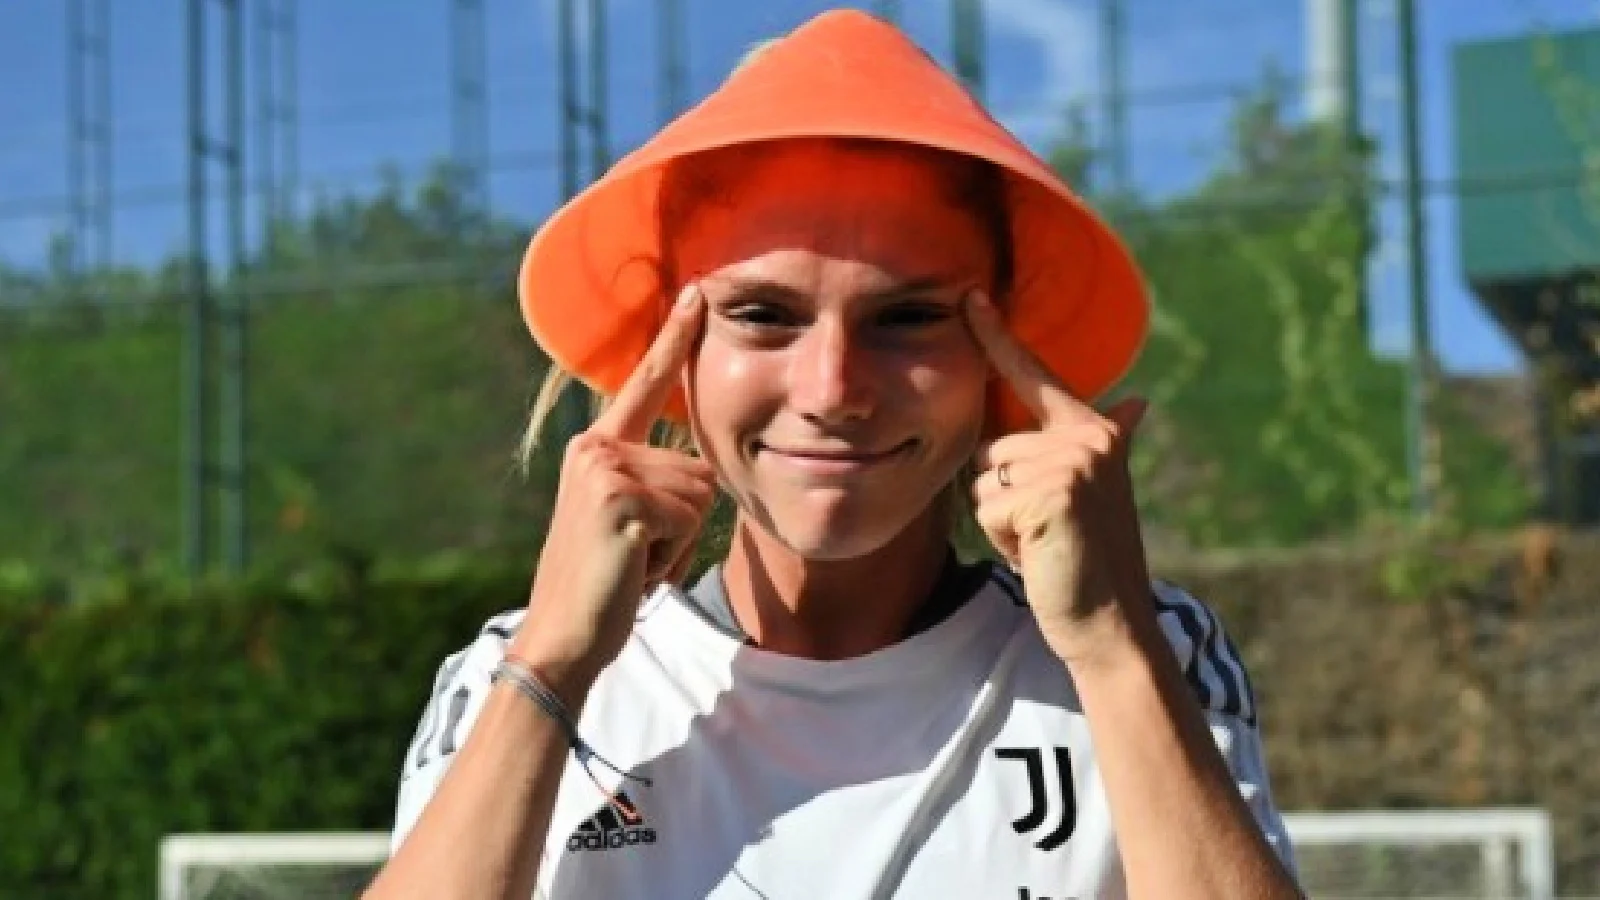 Juventus Women player Cecilia Salvai photographed makes a racist gesture mocking Asian people